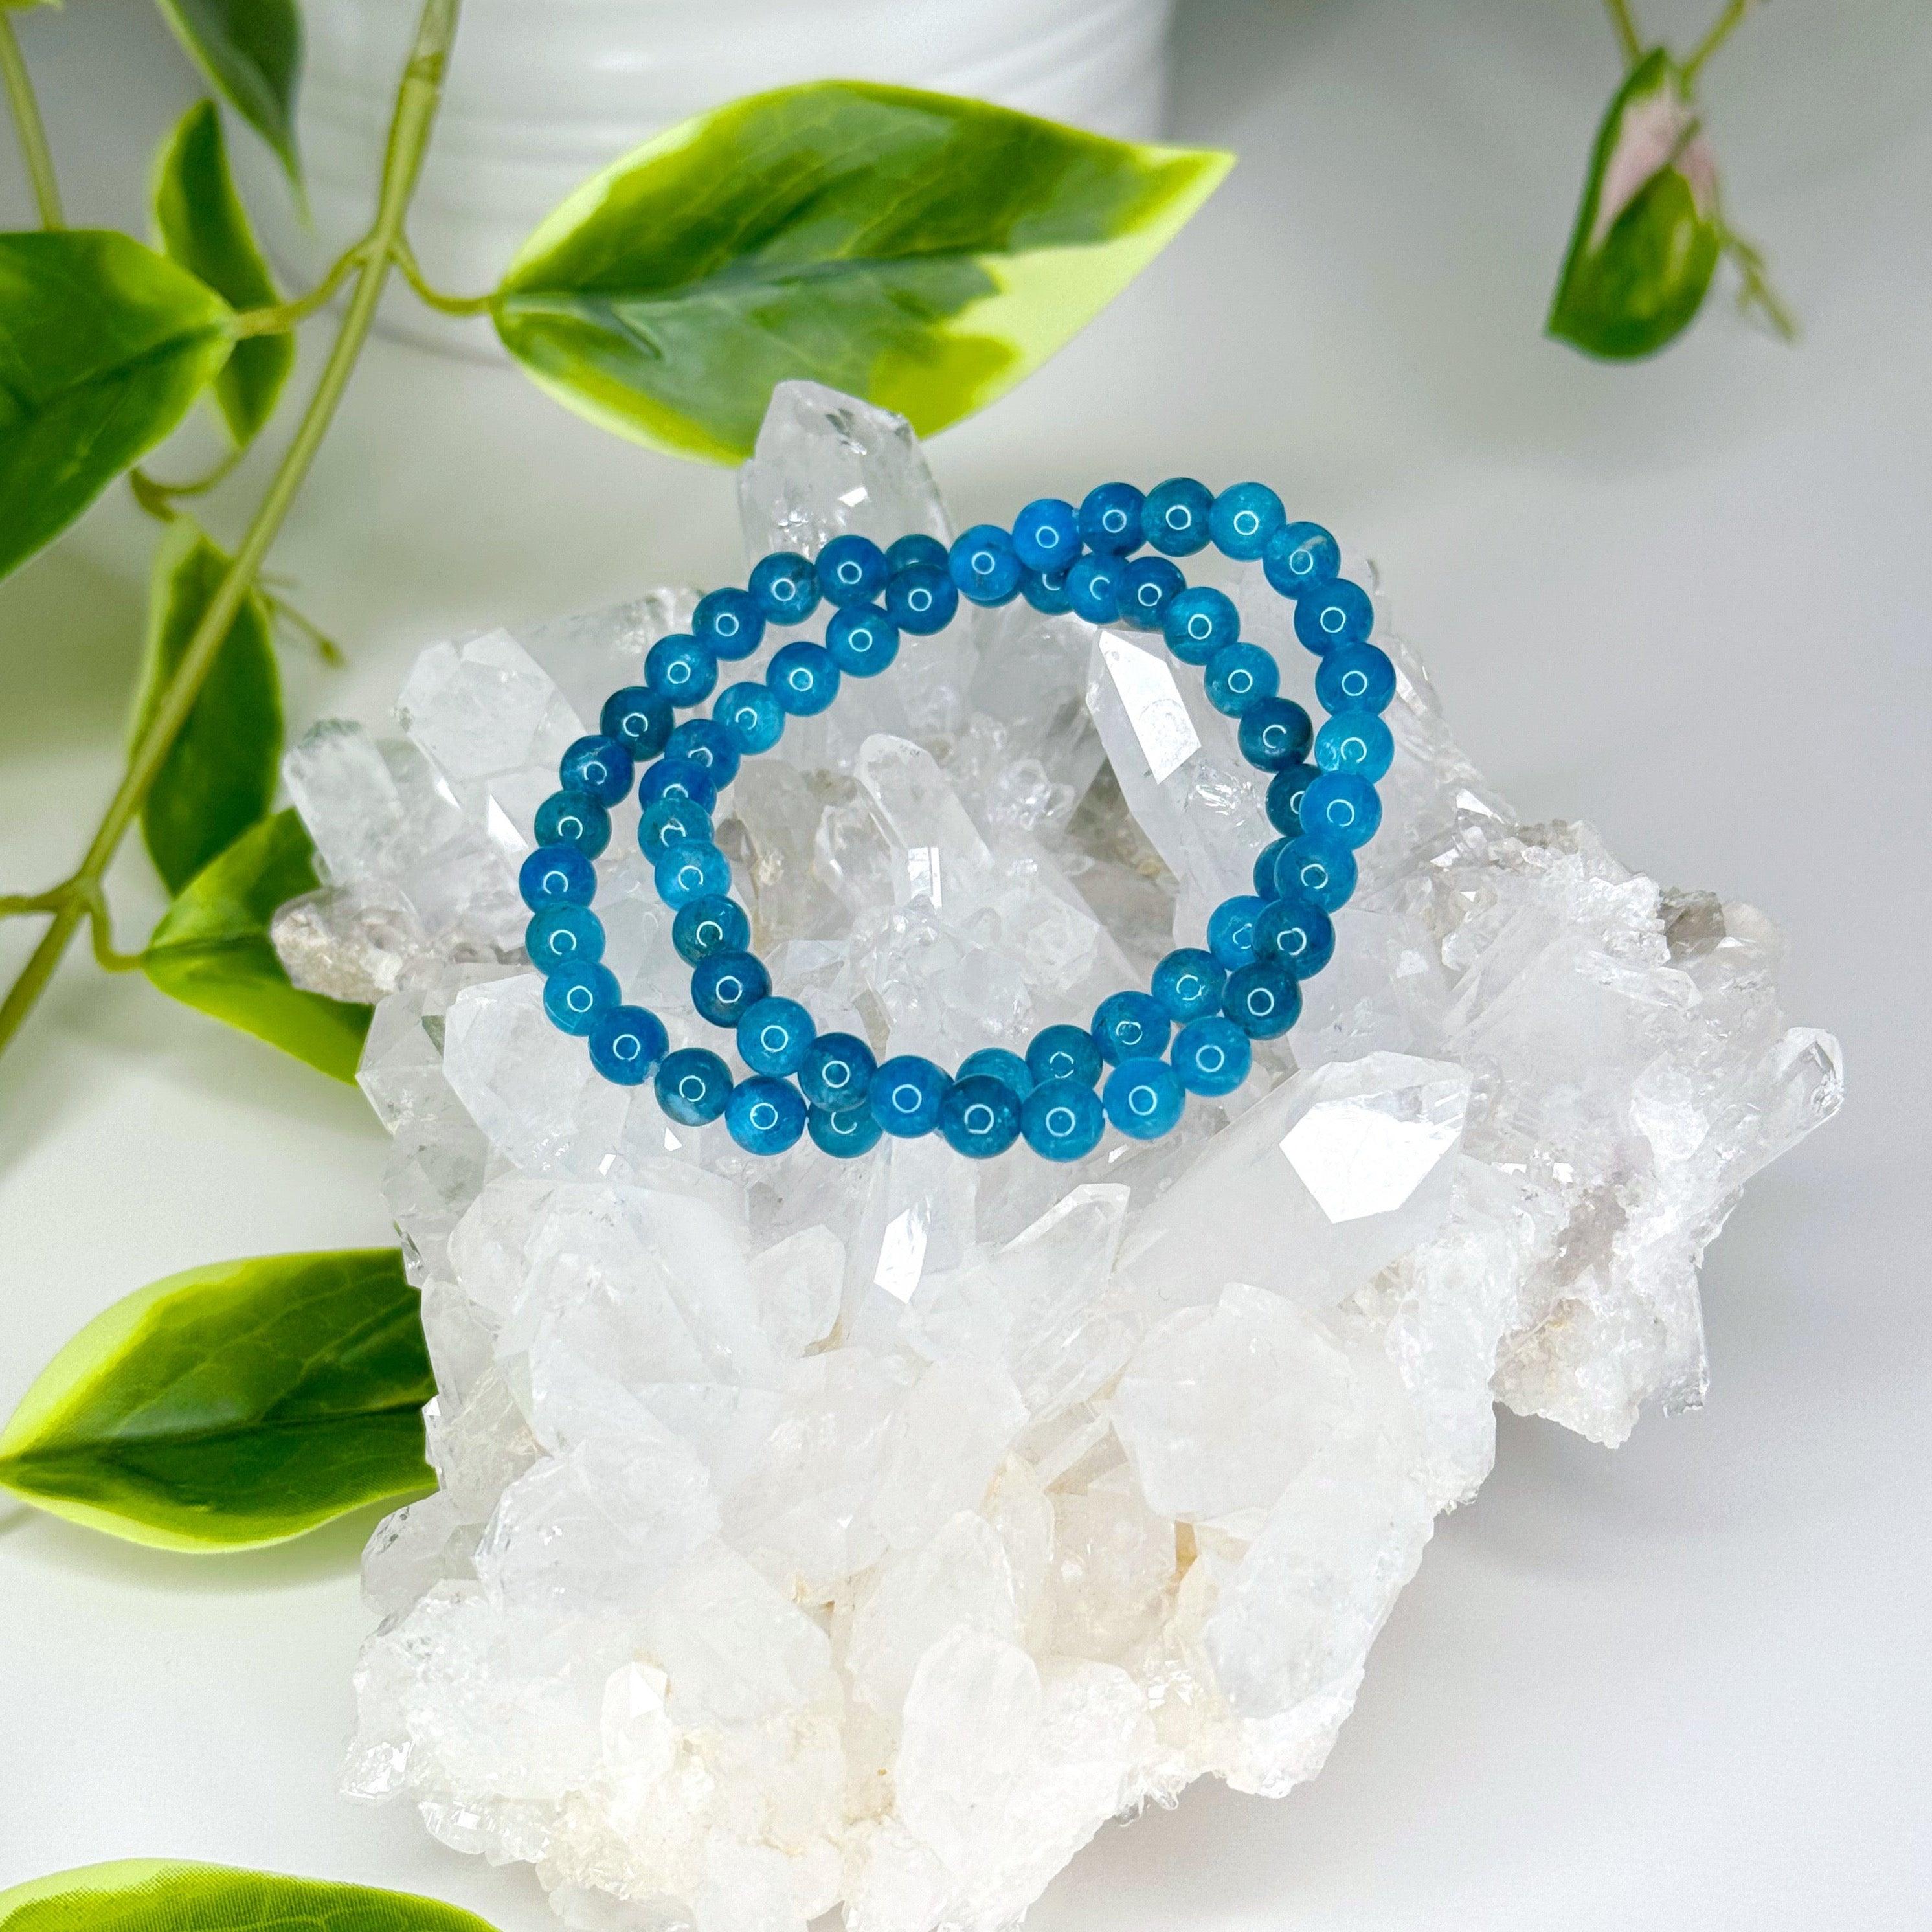 BLUE APATITE 6mm - HANDMADE CRYSTAL BRACELET - 6mm, air, apatite, blue, blue apatite, bracelet, crystal bracelet, handmade bracelet, jewelry, recently added, spring collection, springtime, vernal vibes, water, Wearable - The Mineral Maven